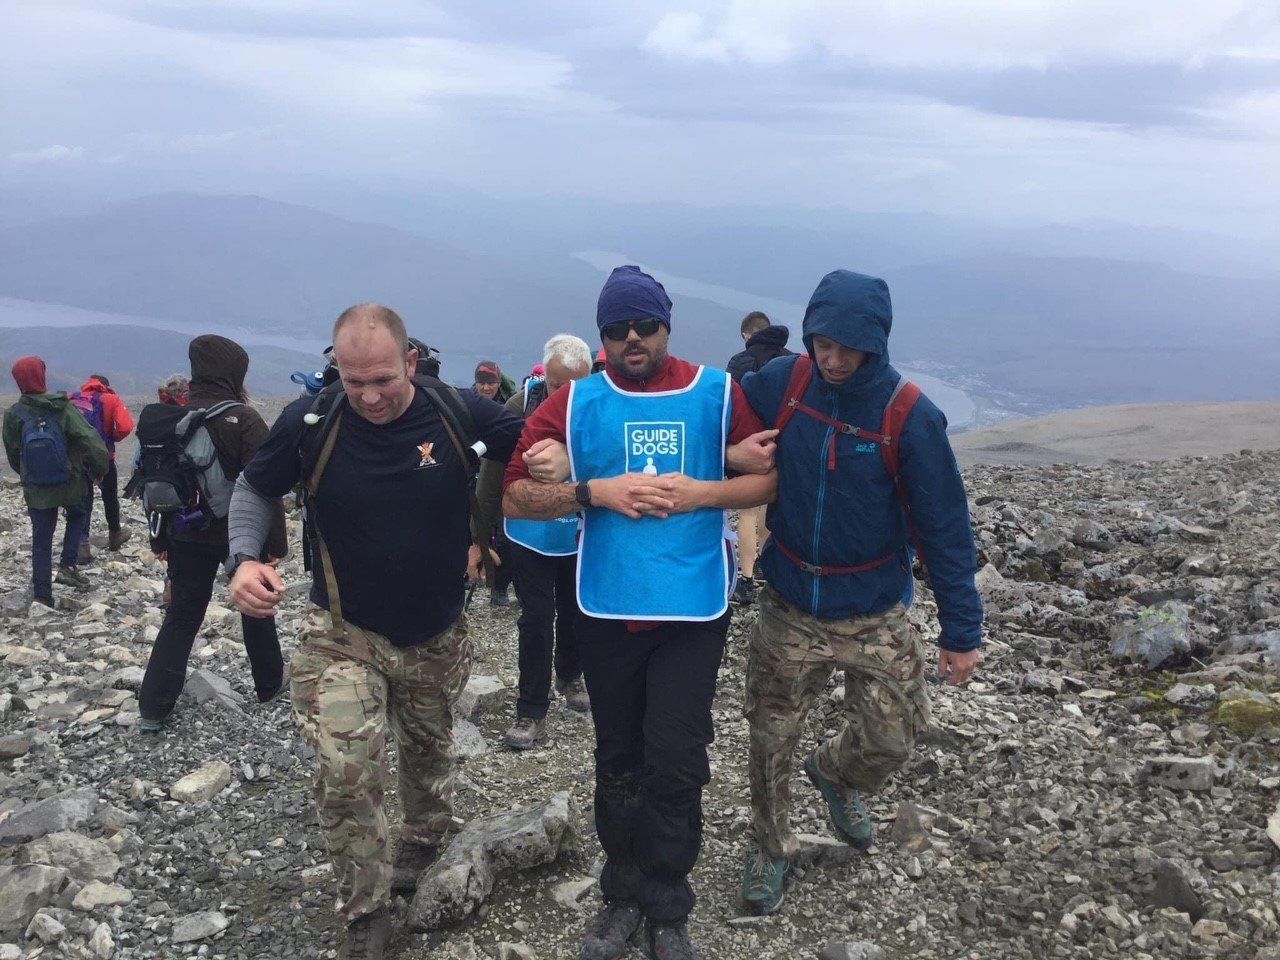 Wayne pugh being guided by Christopher and Ben from the three Scots blackwatch army up Ben Nevis